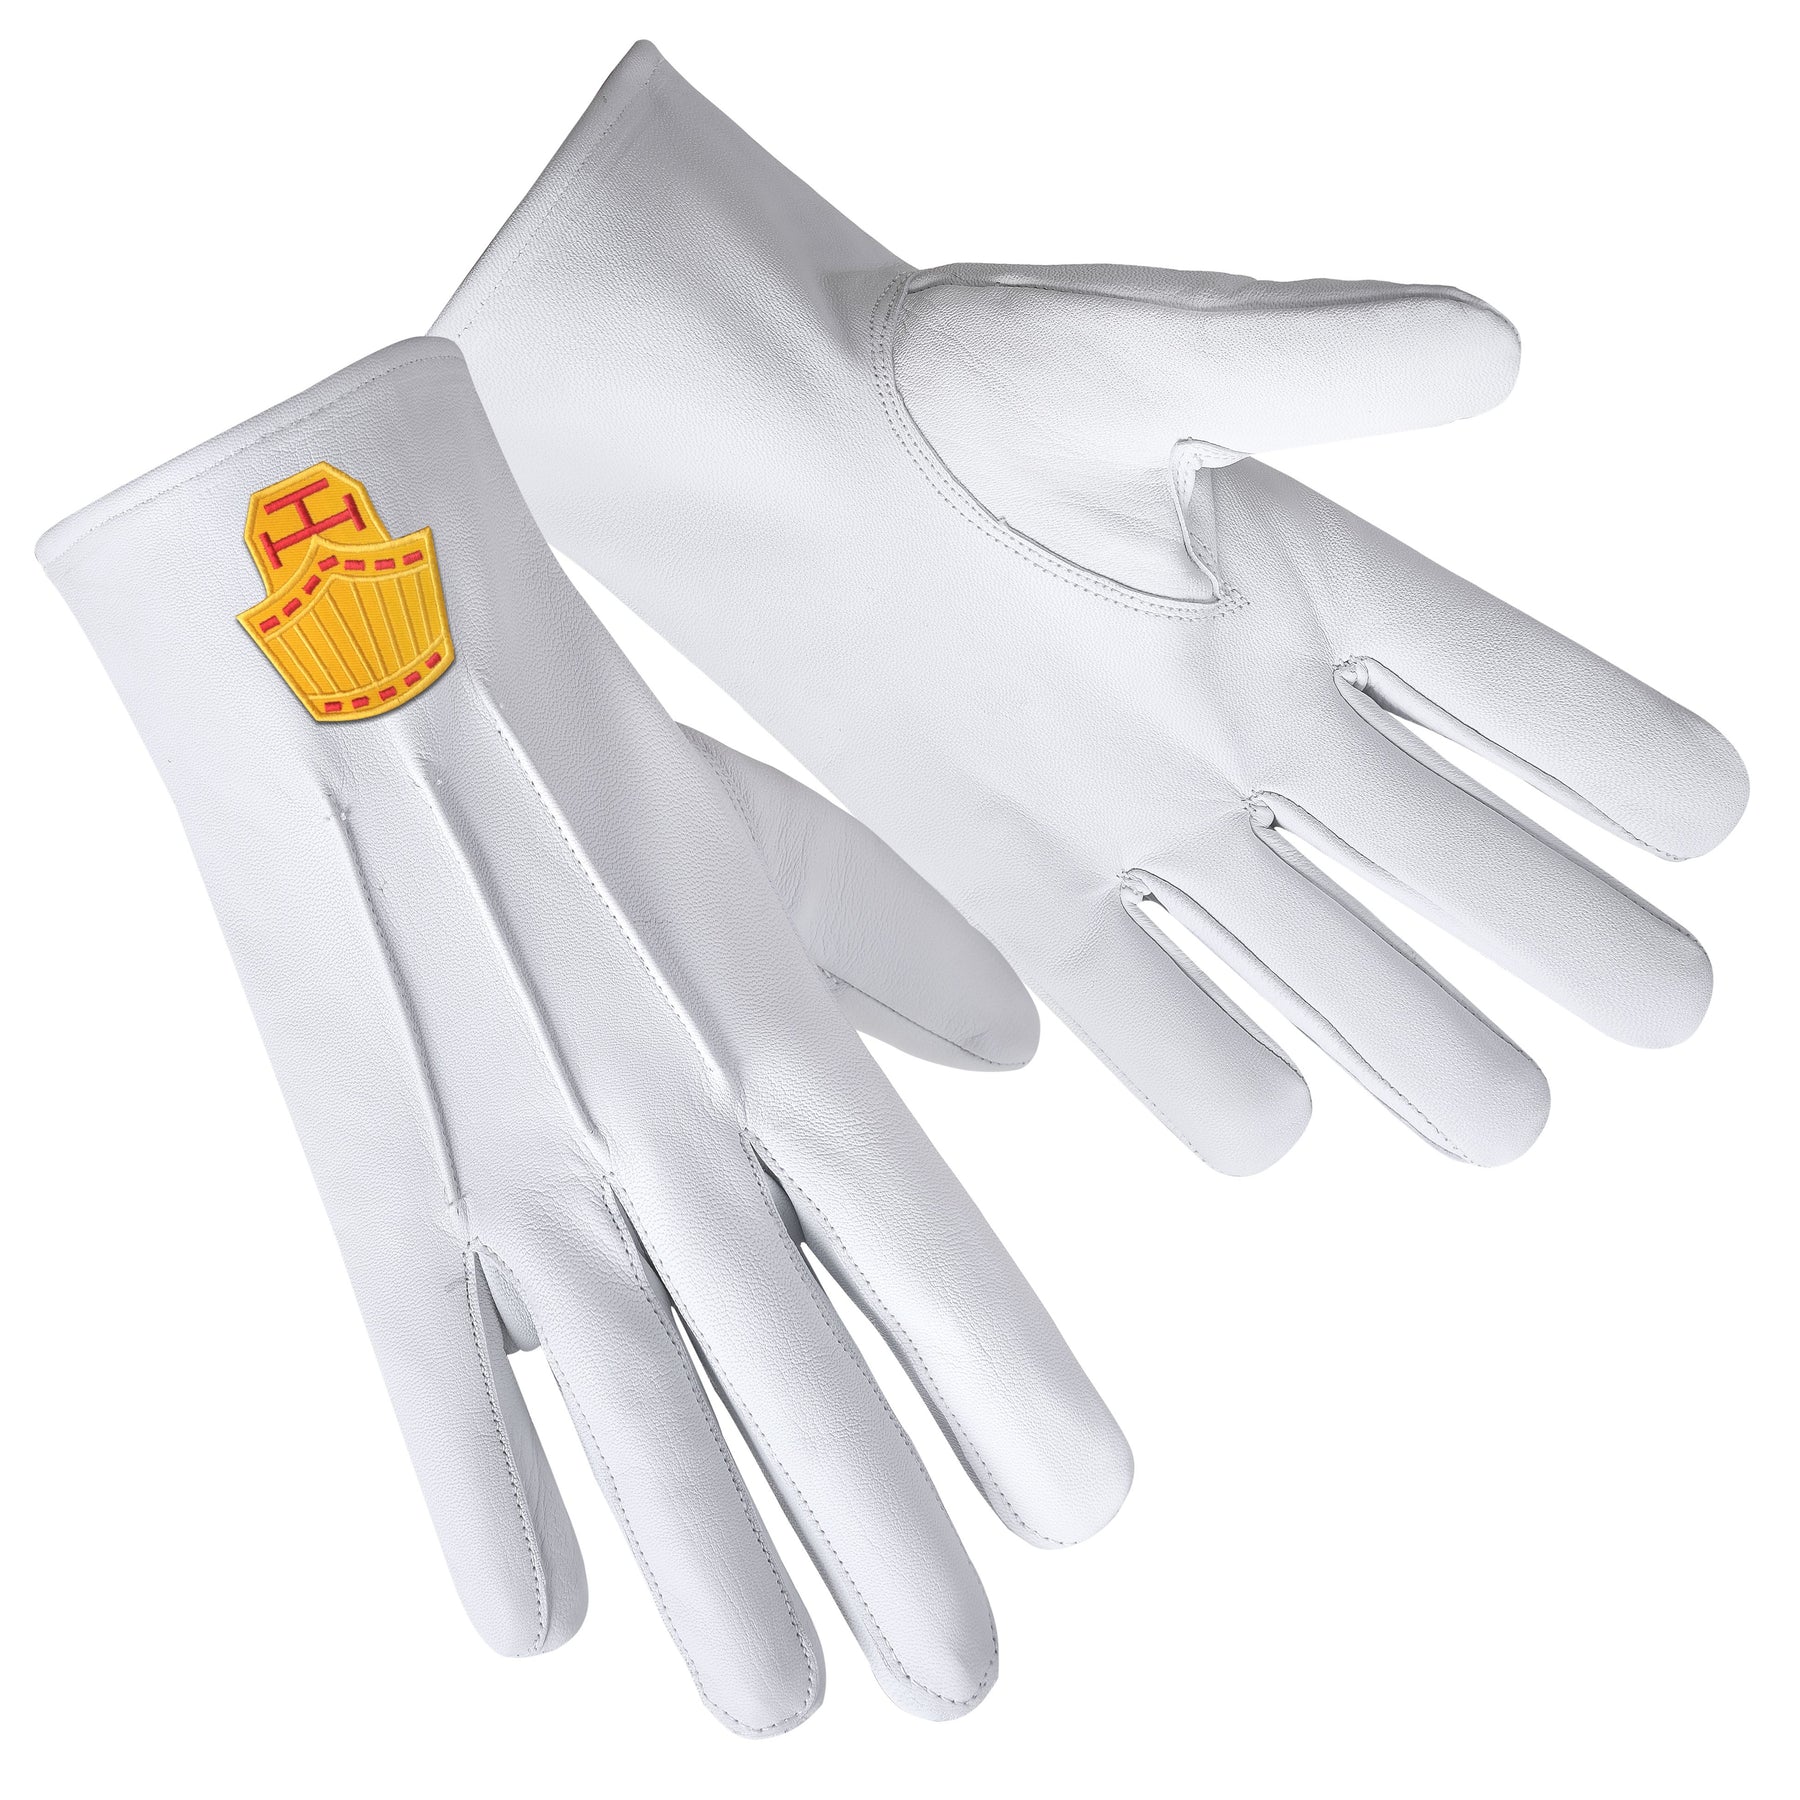 High Priest Royal Arch Chapter Glove - White Leather - Bricks Masons